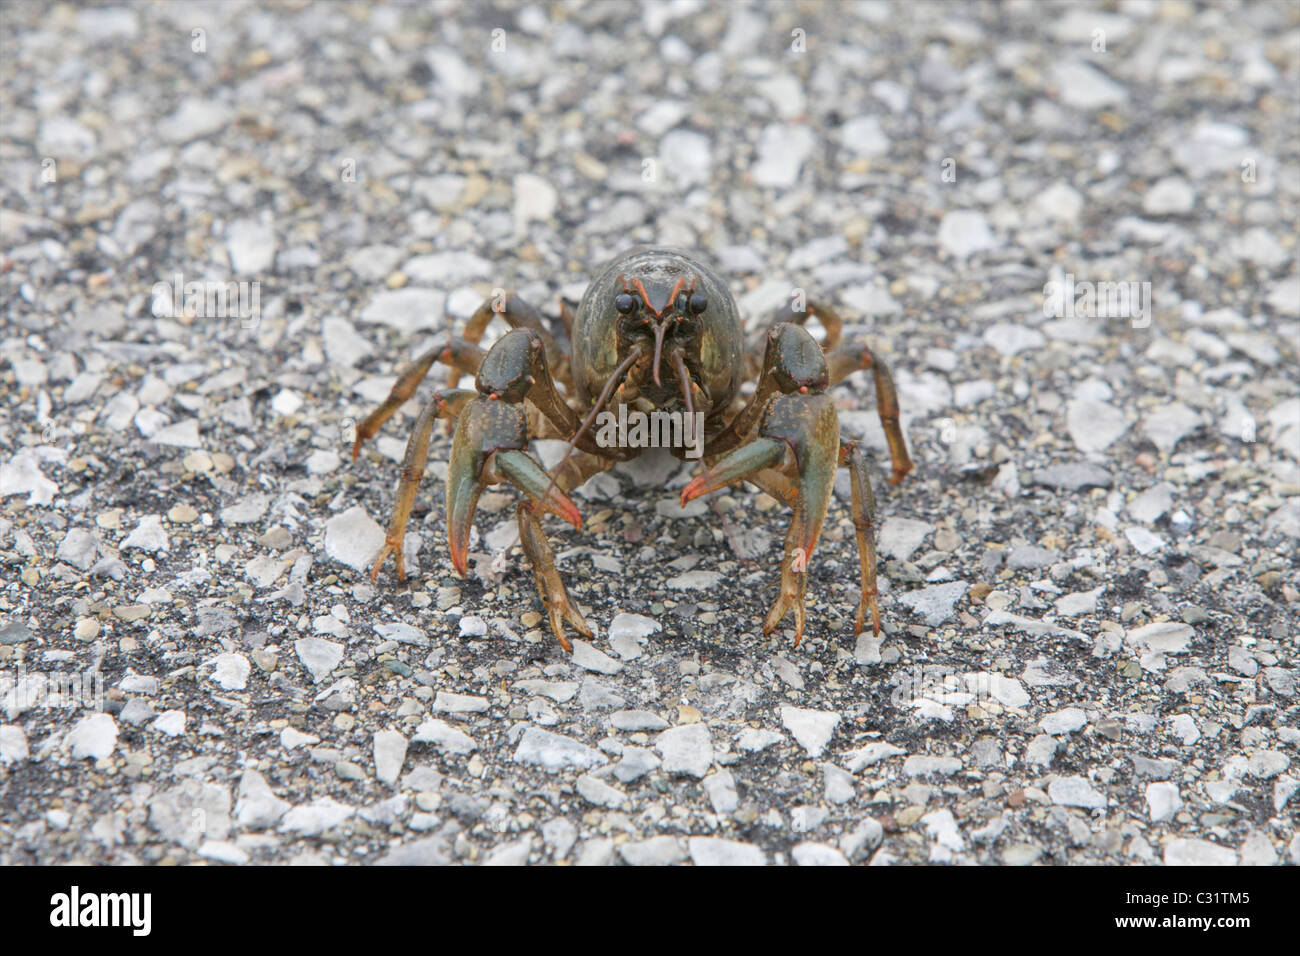 This crayfish was found walking across a road. Stock Photo